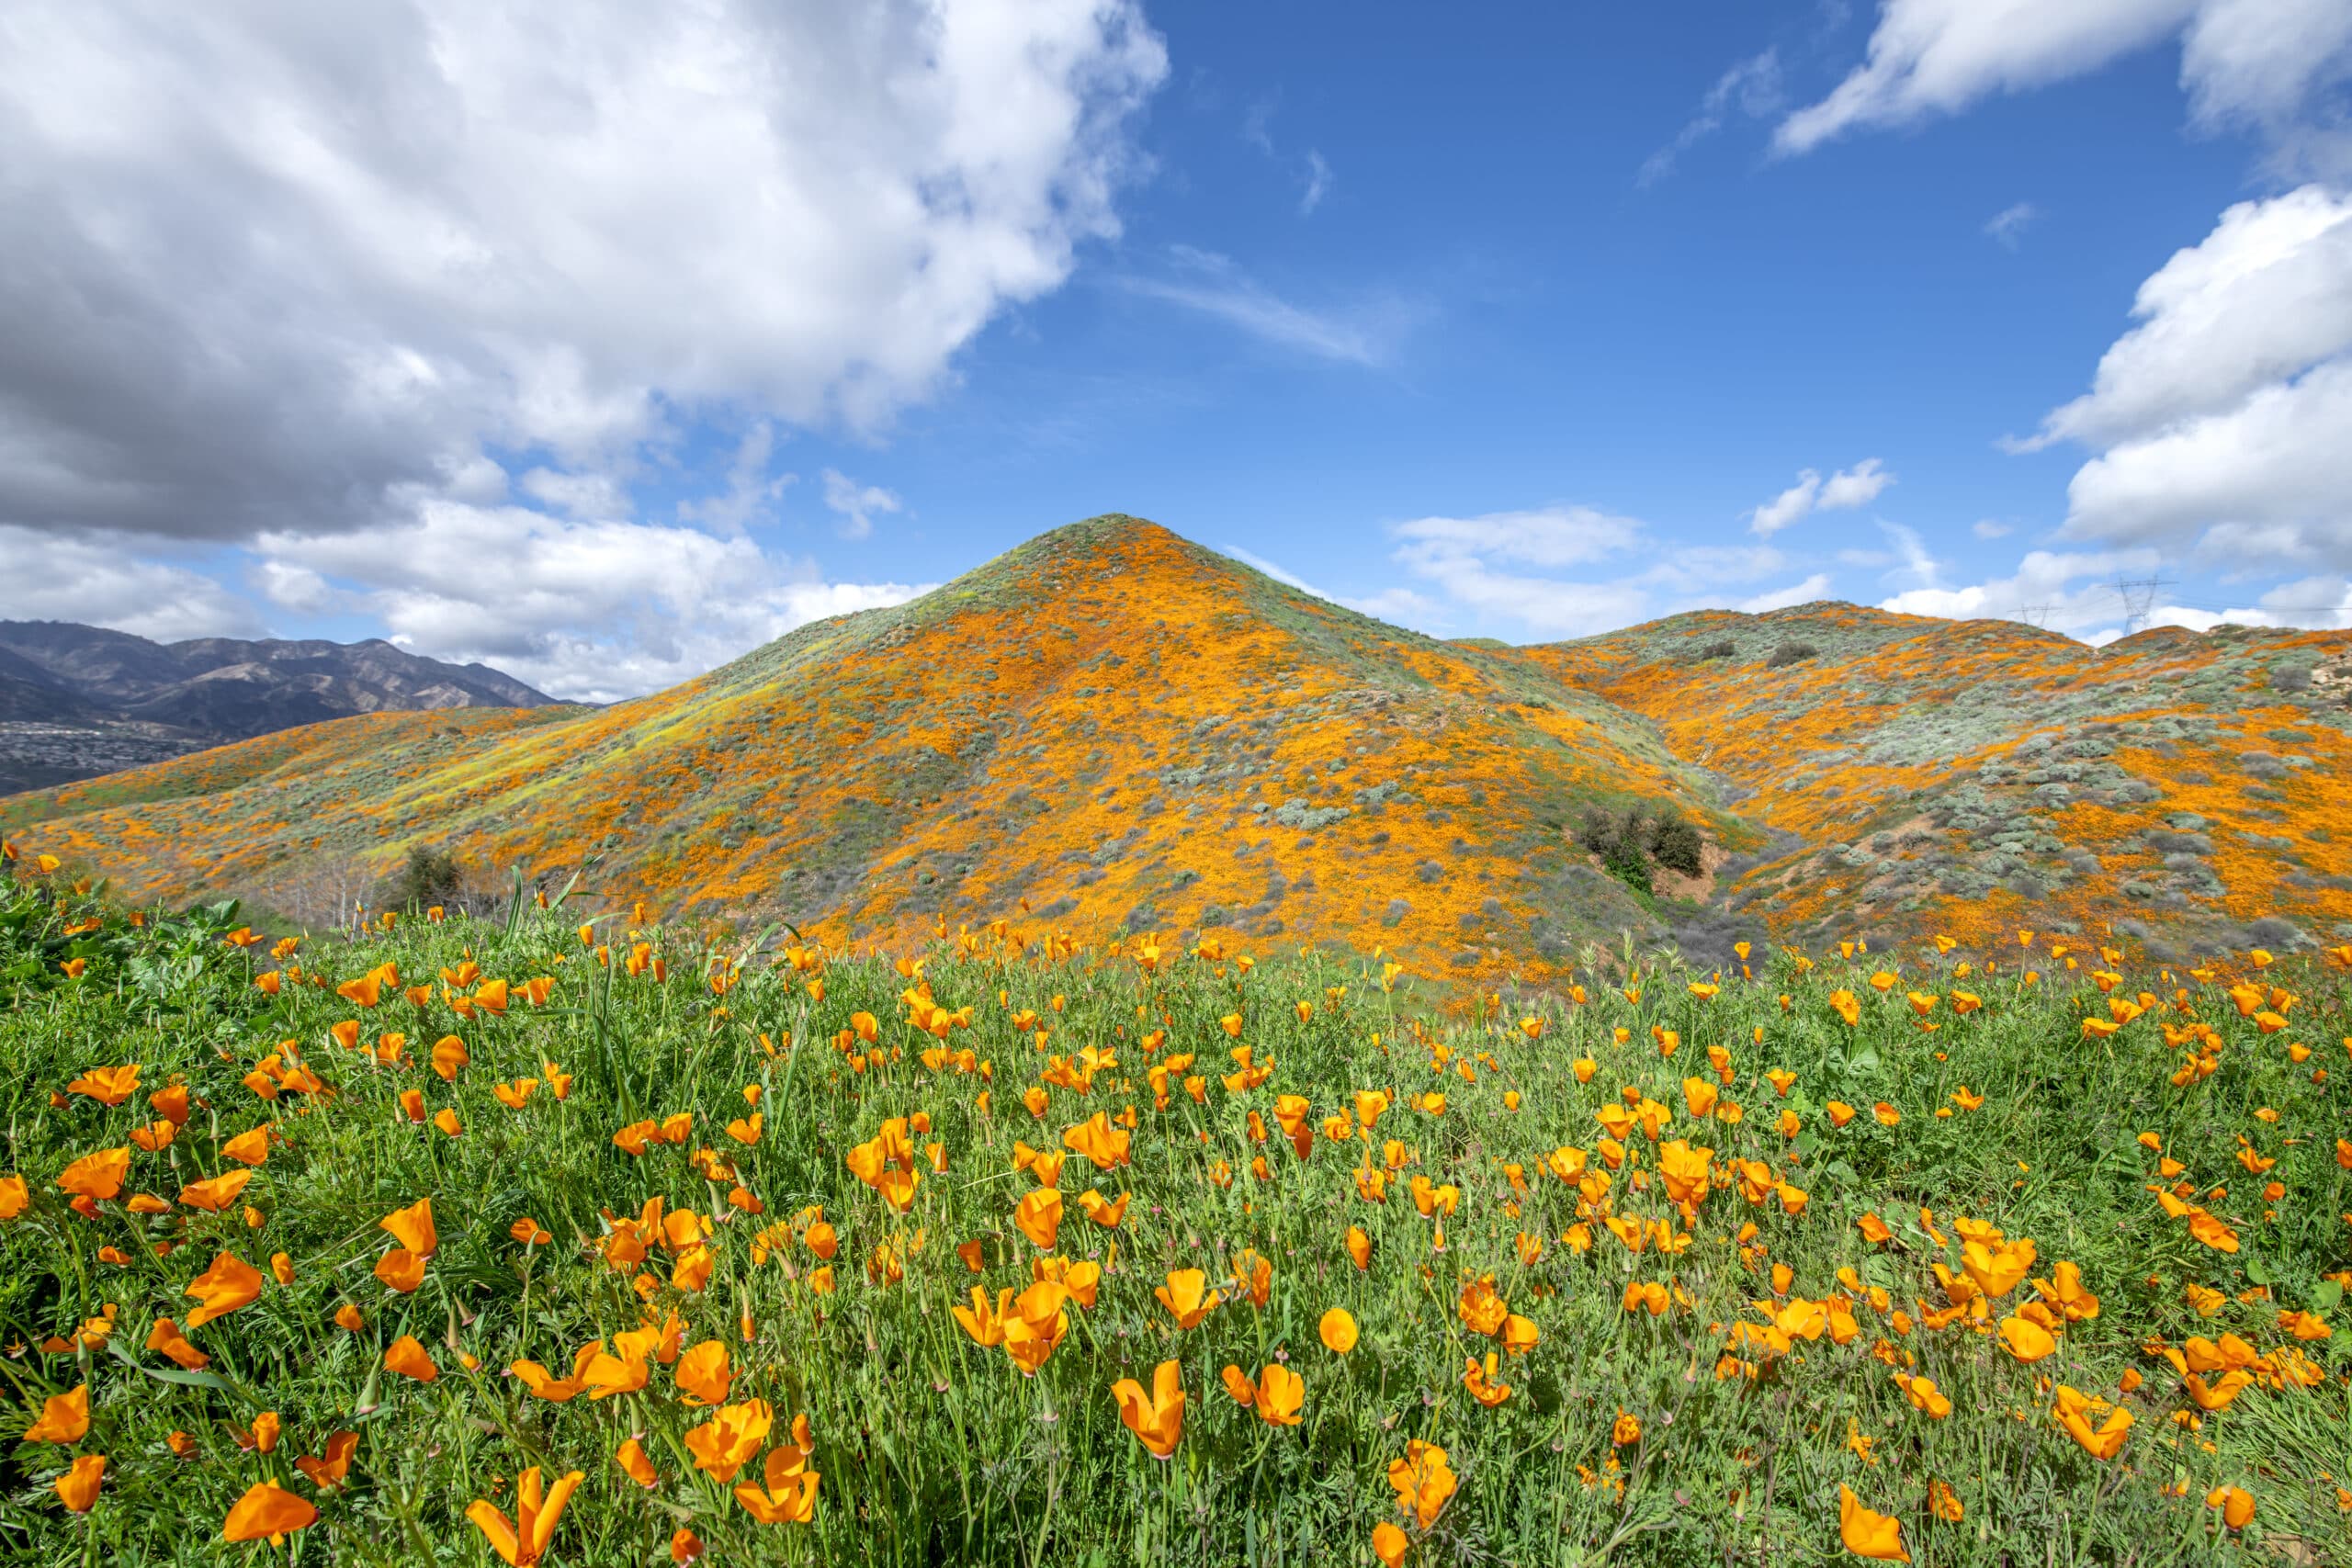 Vibrant orange poppies mixed with purple flowers blooming on a hillside in Lake Elsinore bounce to the gentle breeze during a bright day.